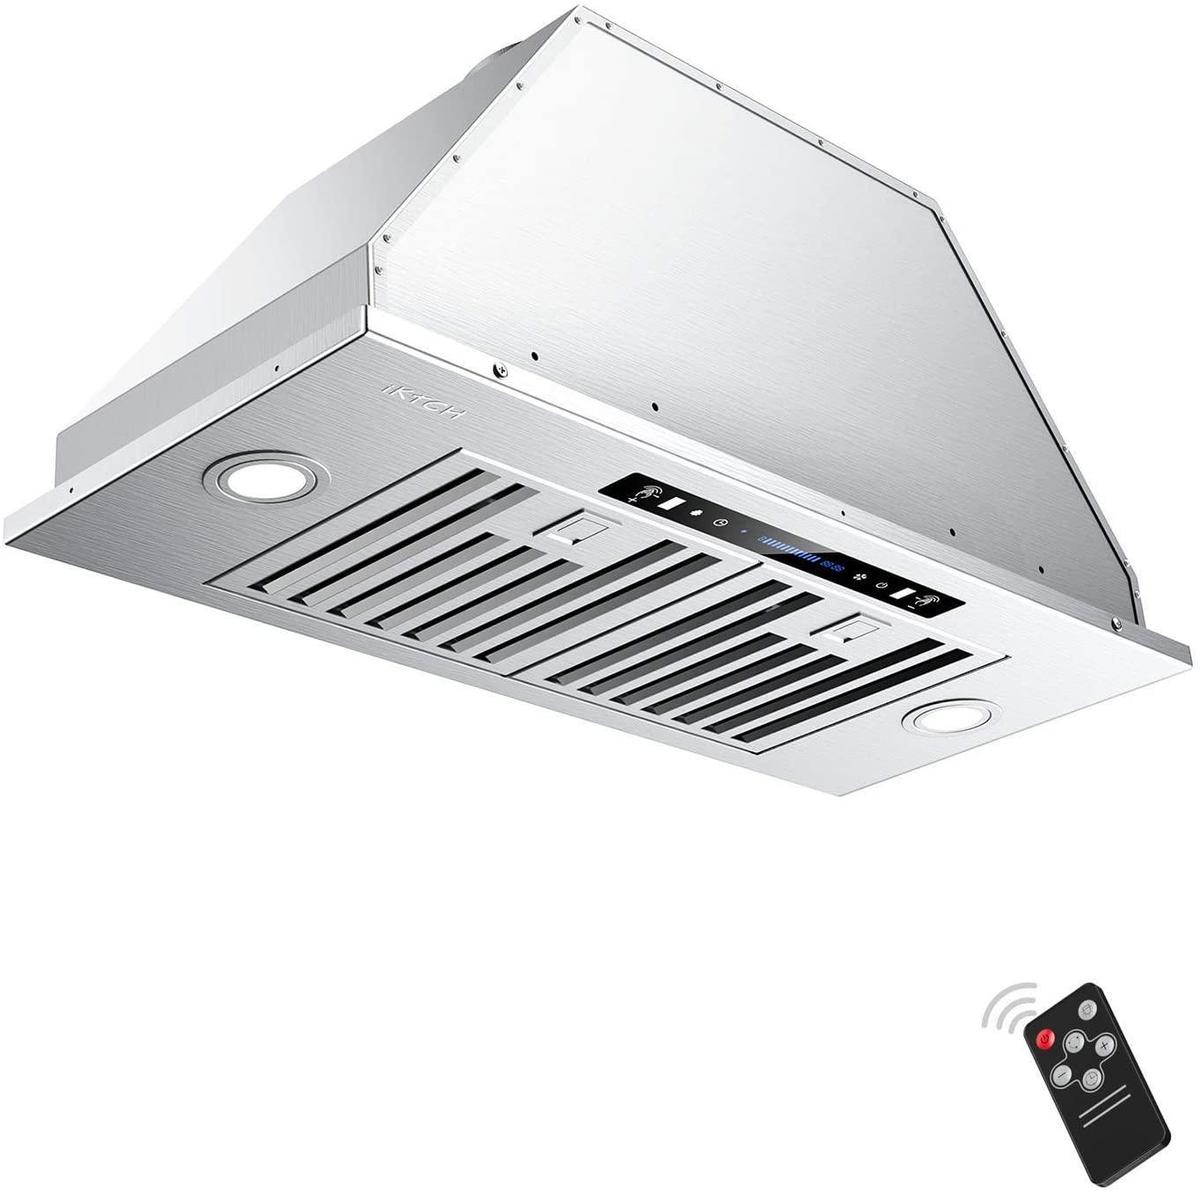 IKTCH 36 inch Built-in/Insert Range Hood 900 CFM, Ducted/Ductless Convertible Duct - $329.00 MSRP